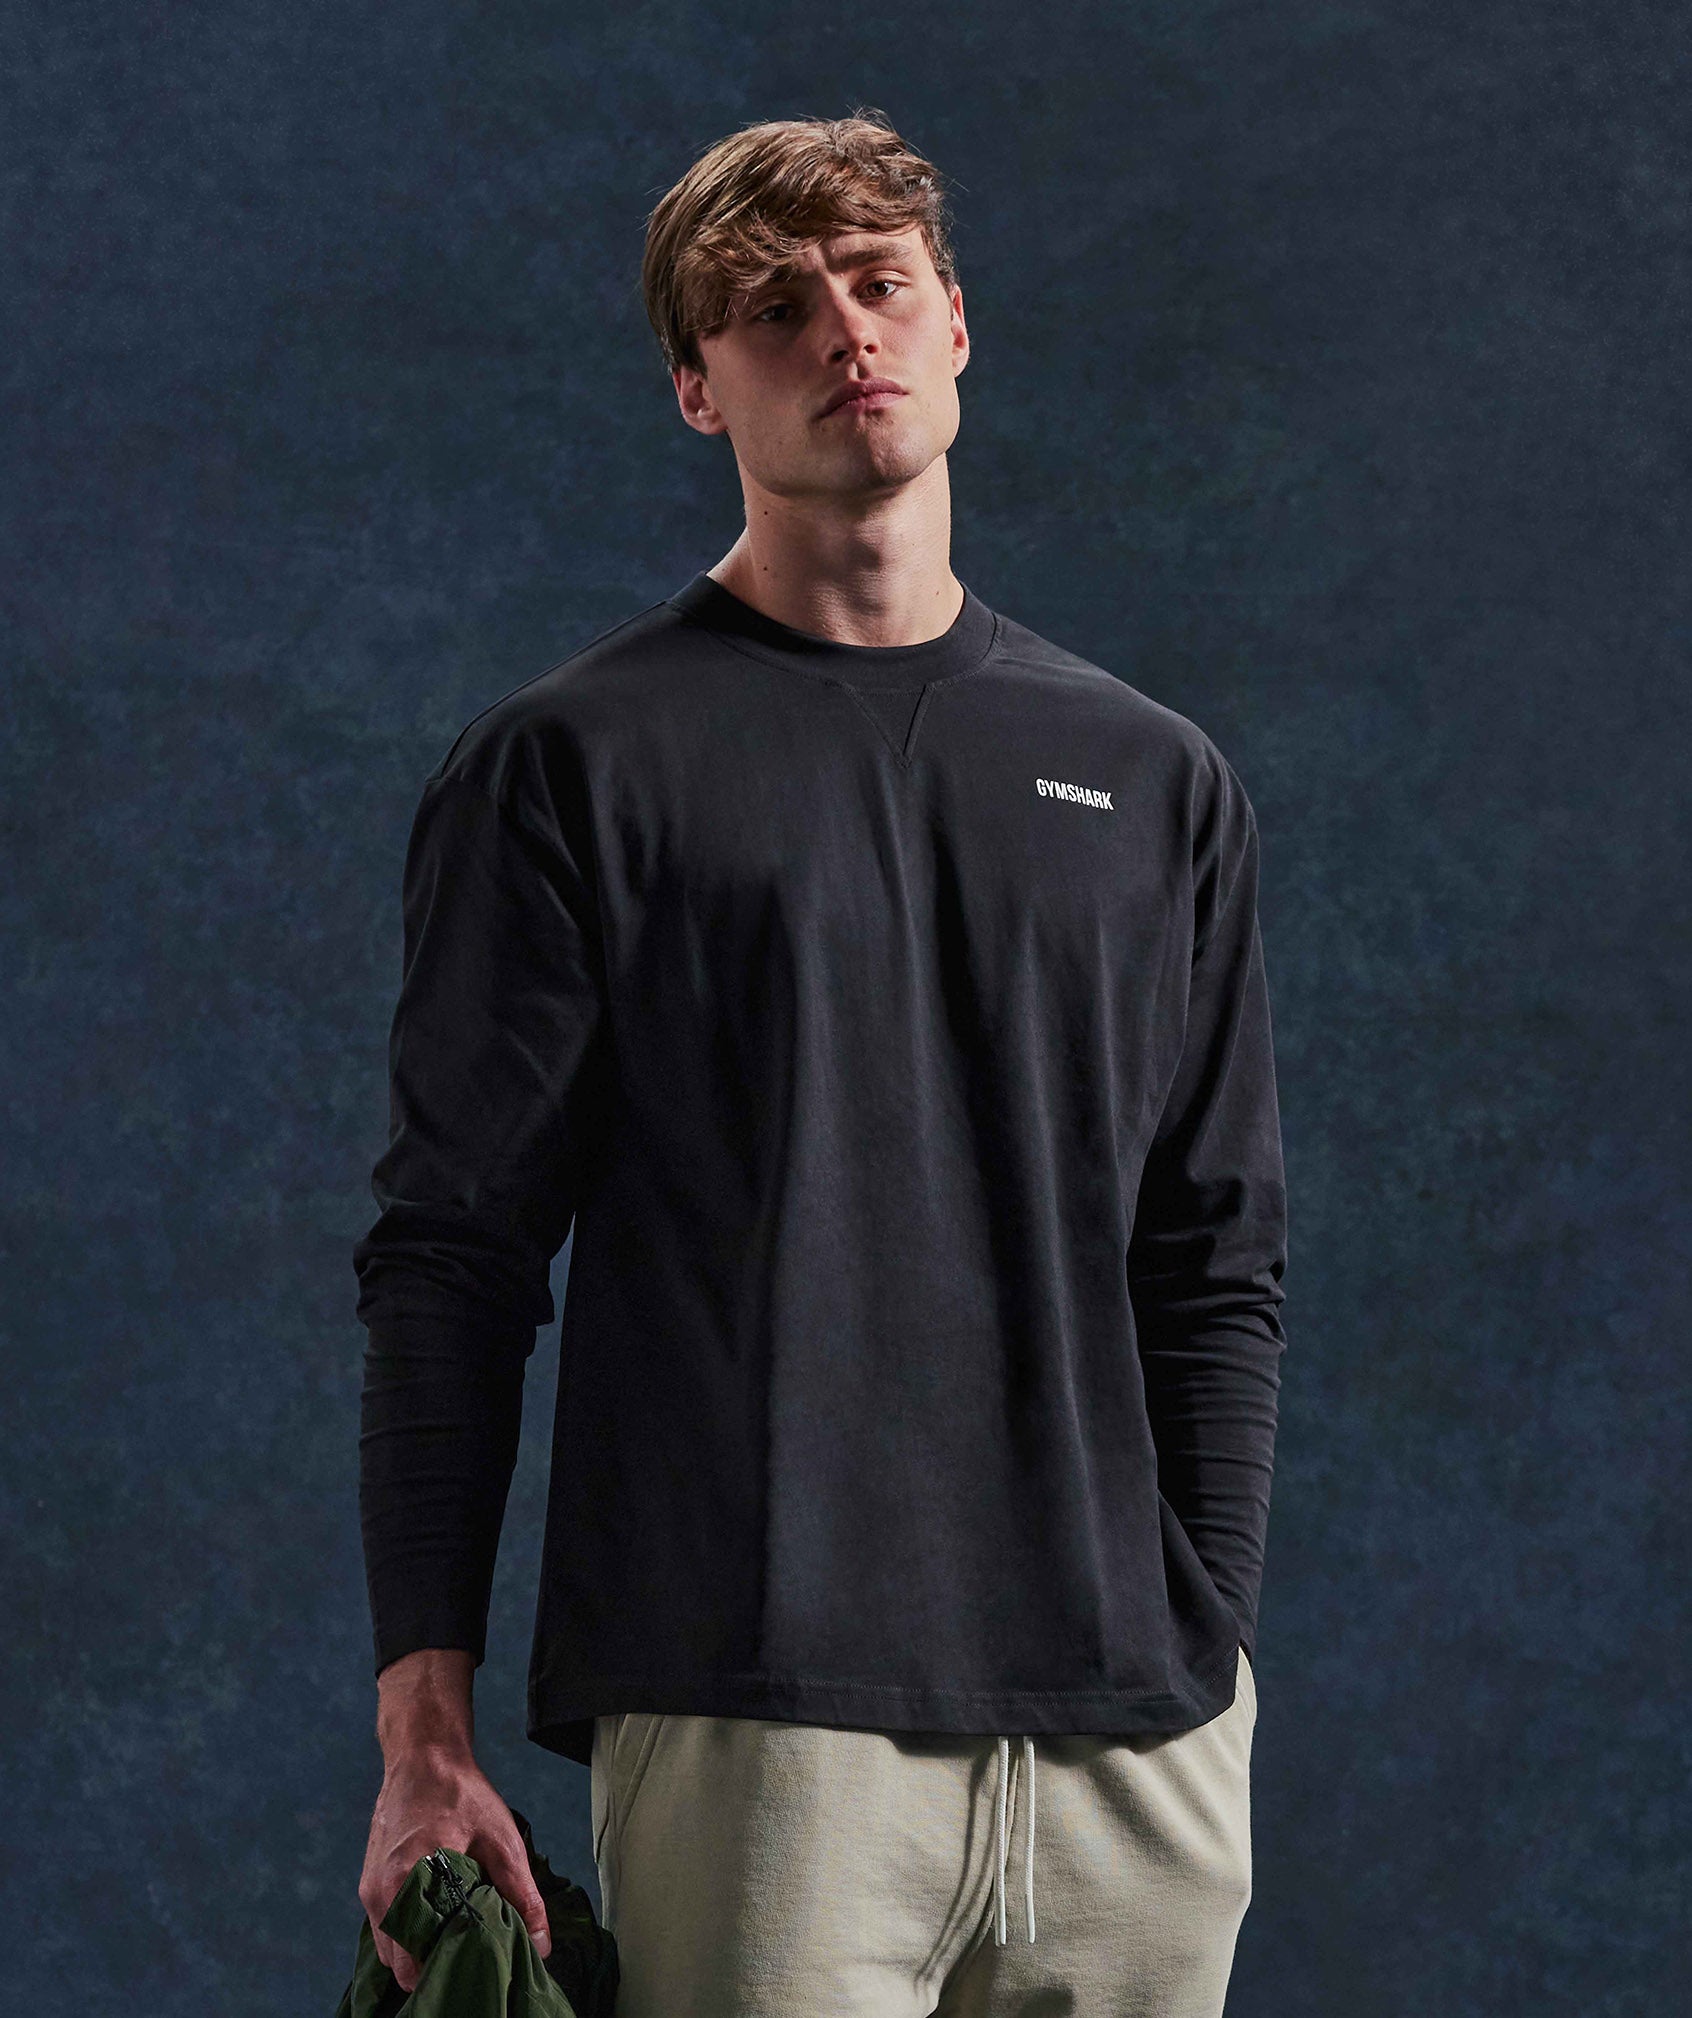 Rest Day Sweats Long Sleeve T-Shirt in Black is out of stock